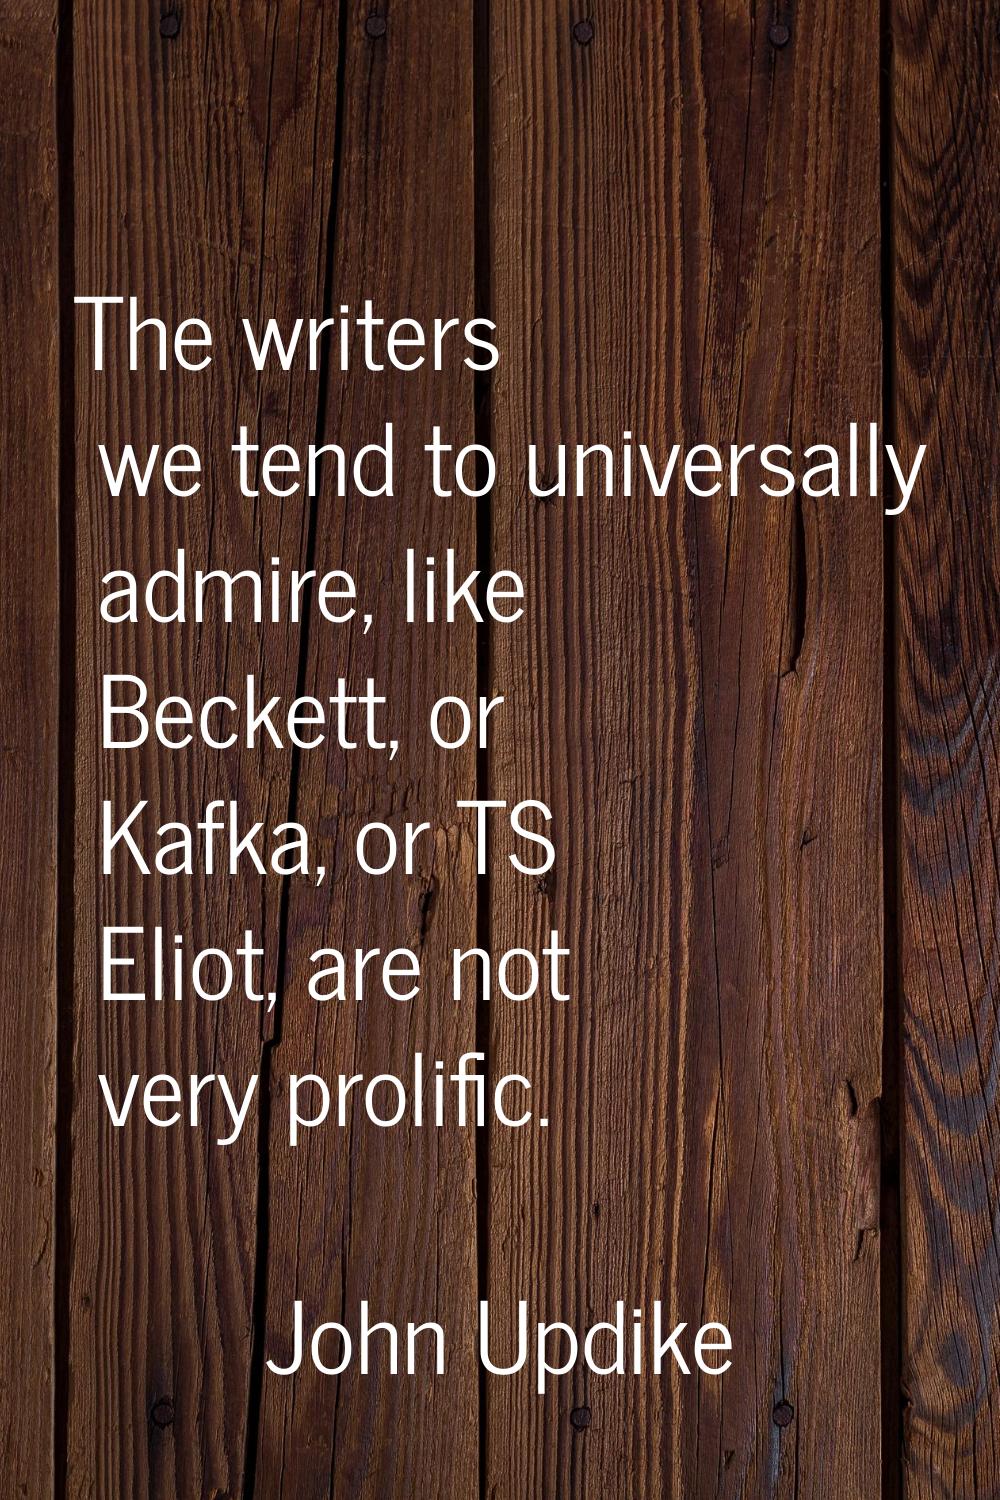 The writers we tend to universally admire, like Beckett, or Kafka, or TS Eliot, are not very prolif